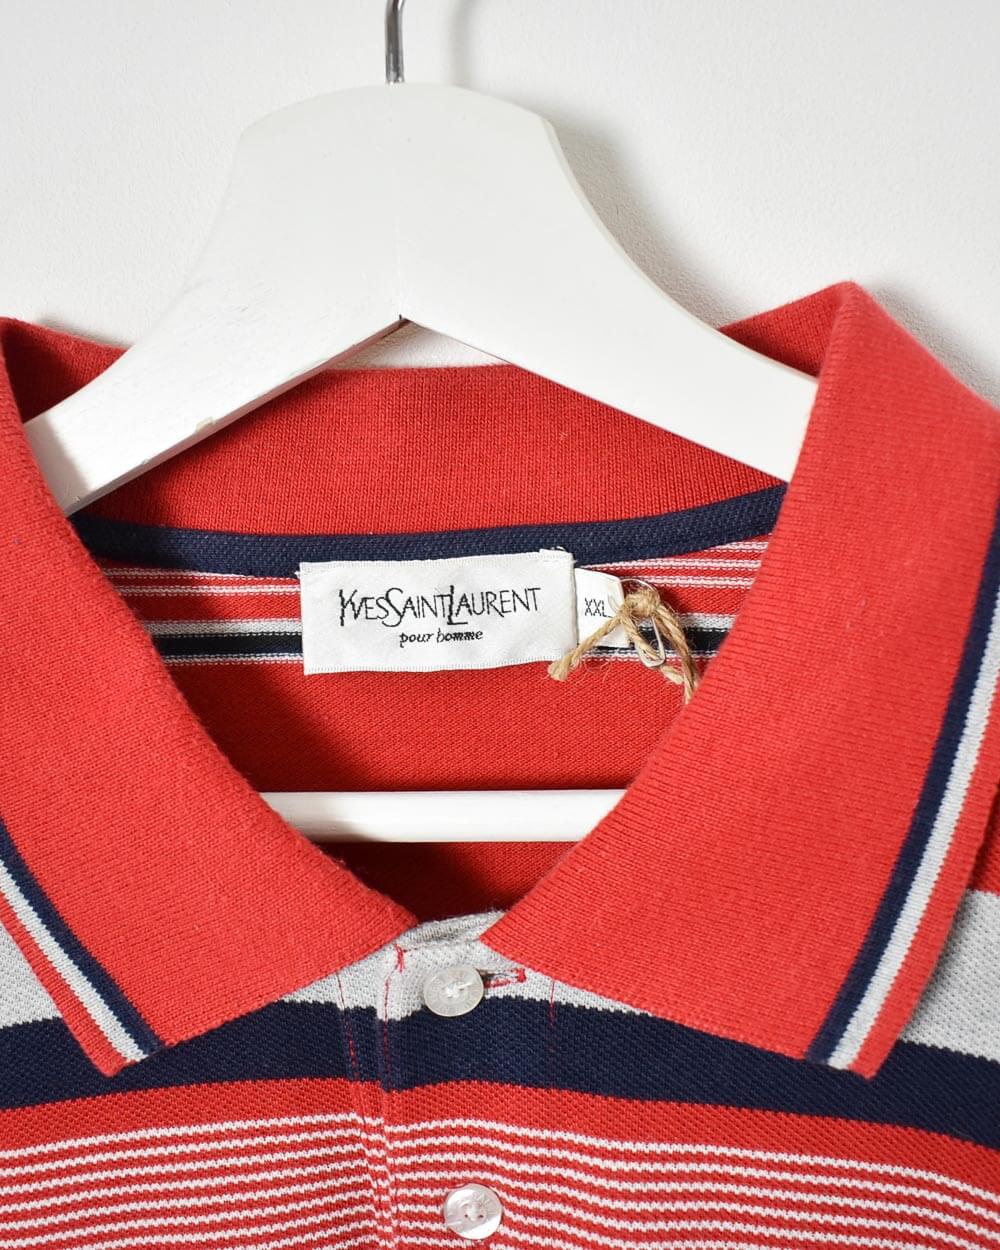 Red Yves Saint Laurent Polo Shirt - X-Large